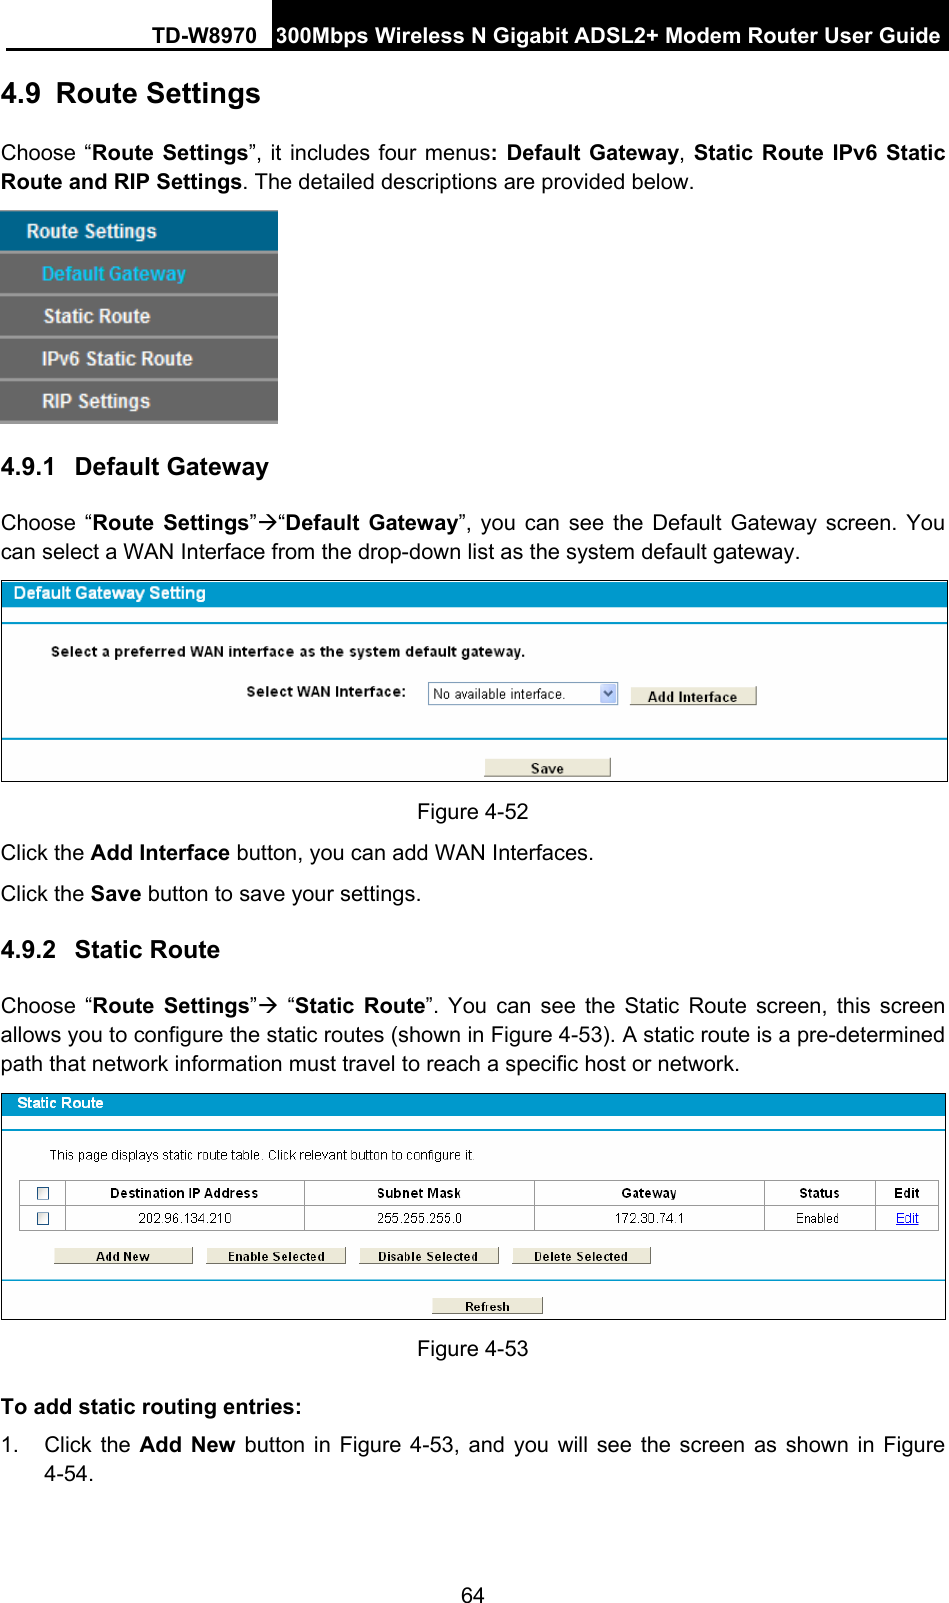 TD-W8970 300Mbps Wireless N Gigabit ADSL2+ Modem Router User Guide 64 4.9  Route Settings Choose “Route Settings”, it includes four menus: Default Gateway, Static Route IPv6 Static Route and RIP Settings. The detailed descriptions are provided below.  4.9.1  Default Gateway Choose “Route Settings”Æ“Default Gateway”, you can see the Default Gateway screen. You can select a WAN Interface from the drop-down list as the system default gateway.    Figure 4-52 Click the Add Interface button, you can add WAN Interfaces. Click the Save button to save your settings. 4.9.2  Static Route Choose “Route Settings”Æ “Static Route”. You can see the Static Route screen, this screen allows you to configure the static routes (shown in Figure 4-53). A static route is a pre-determined path that network information must travel to reach a specific host or network.  Figure 4-53 To add static routing entries: 1. Click the Add New button in Figure 4-53, and you will see the screen as shown in Figure 4-54.  